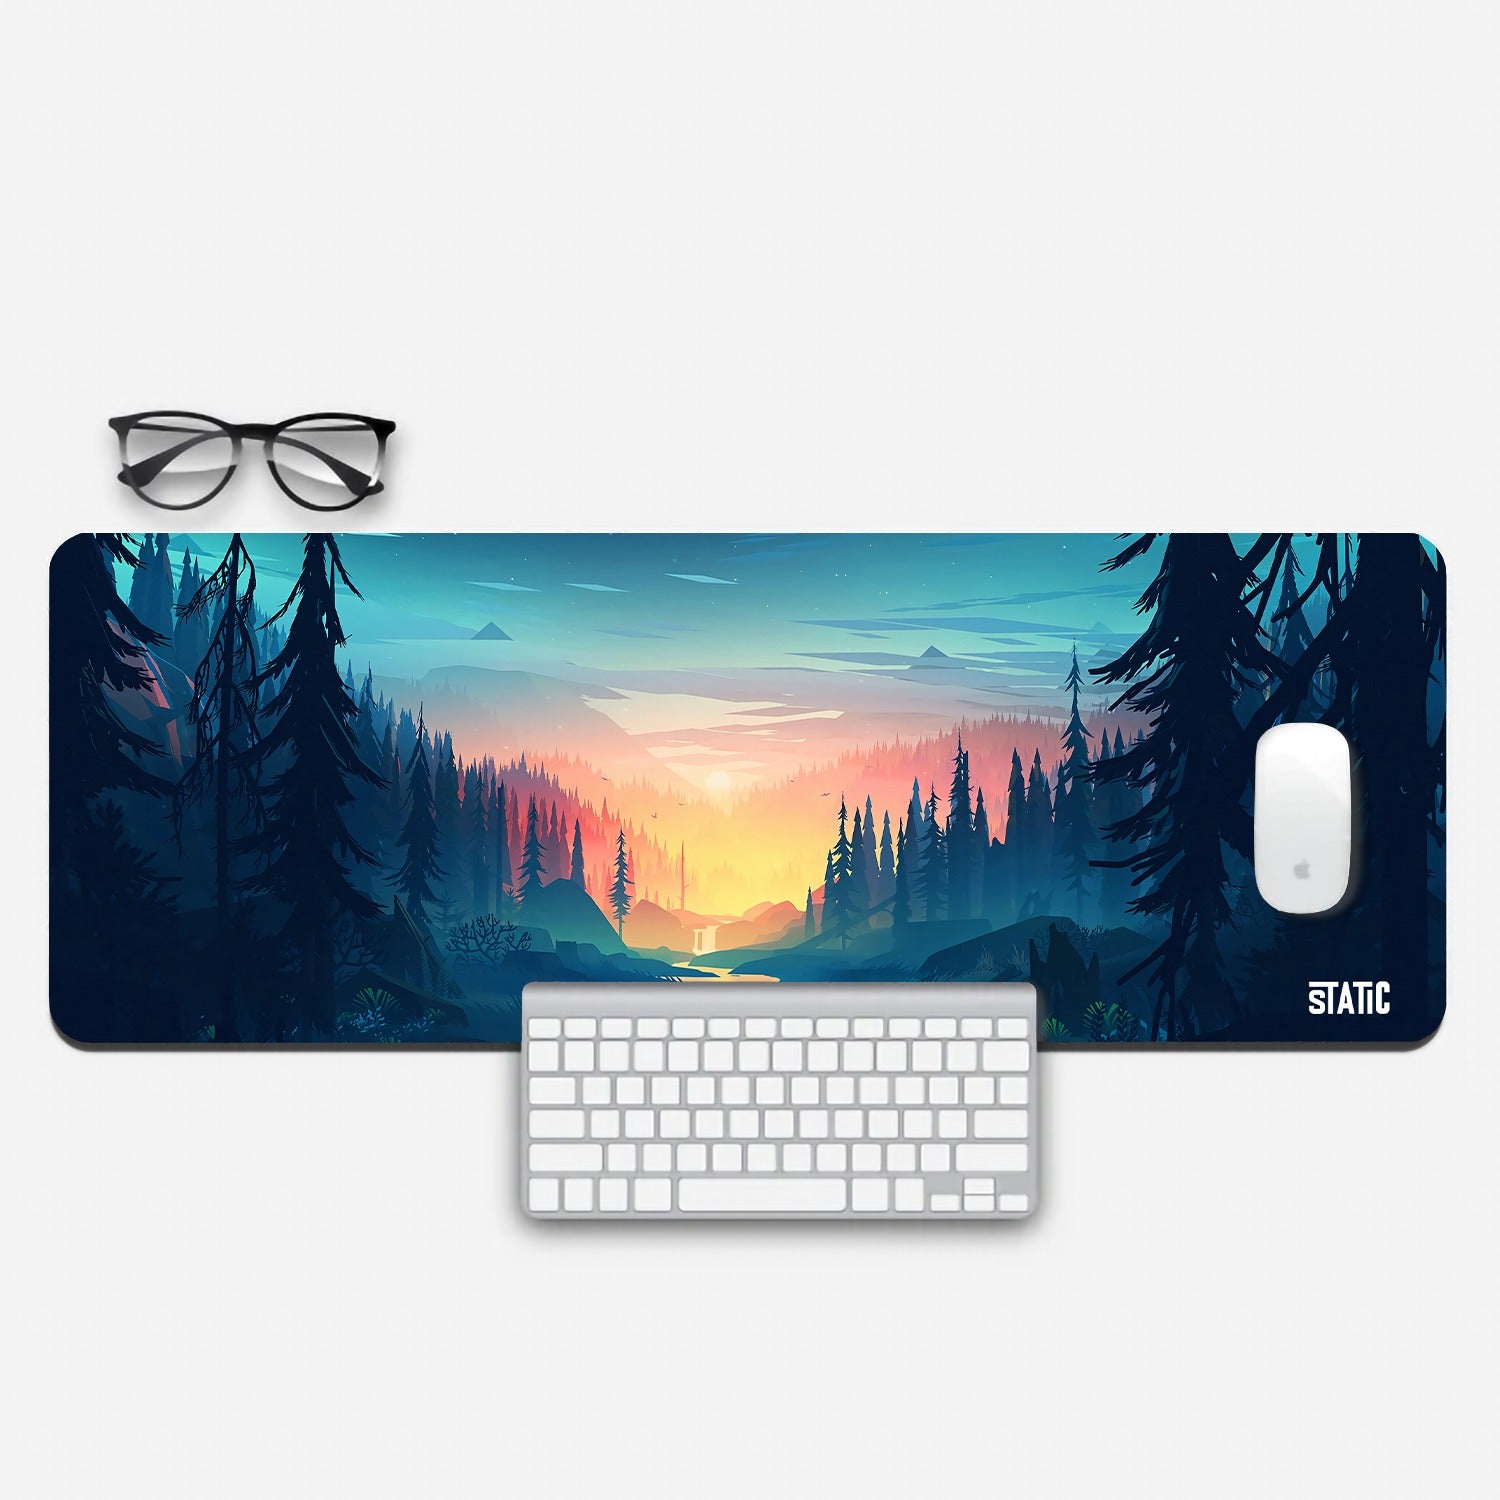 Step into the enchantment of gaming with our extended mouse pad. This captivating design features a dark forest with a serene river and a mesmerizing yellow-orange glow, akin to dawn and dusk. Elevate your gaming experience and workspace aesthetics simultaneously. Immerse yourself in the mystique of this forest – order our extended gaming mouse pad today and embark on a truly magical gaming journey.